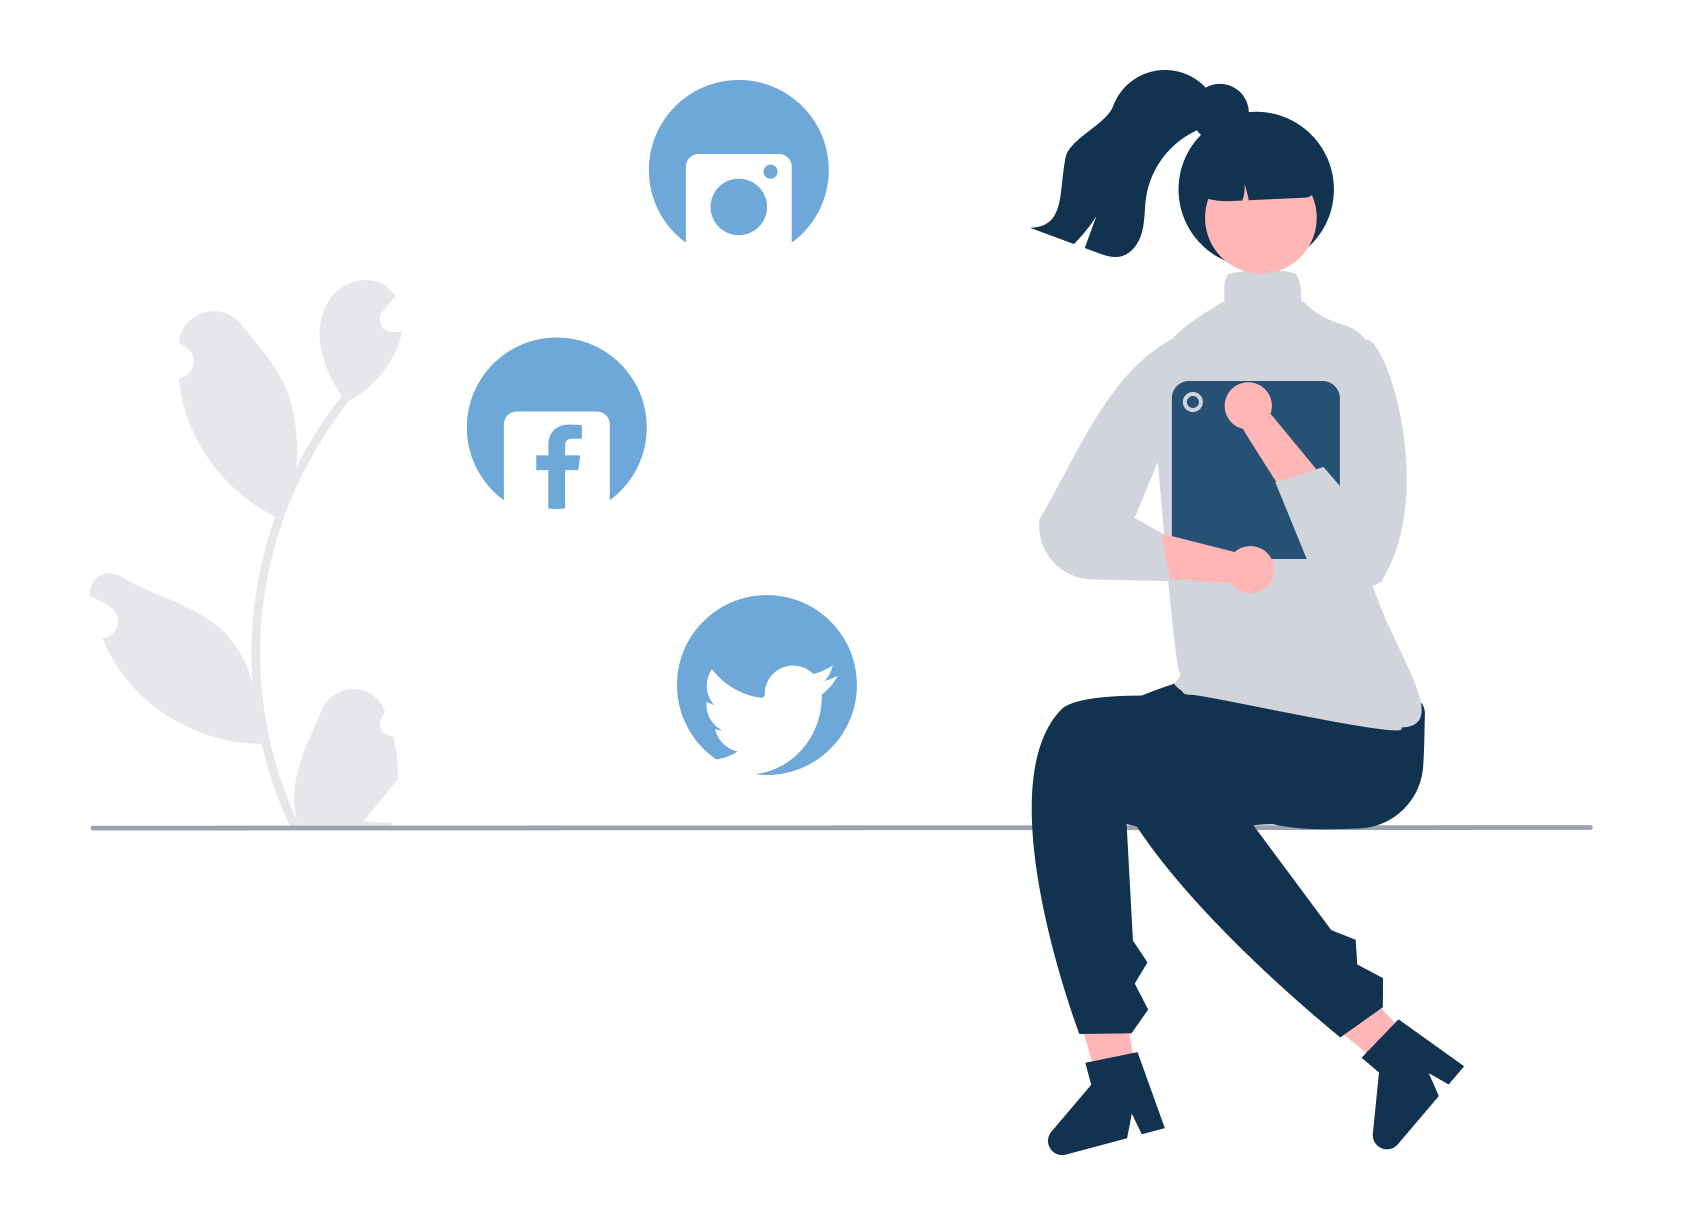 Illustration of a figure holding a tablet computer surrounded by social media platform icons